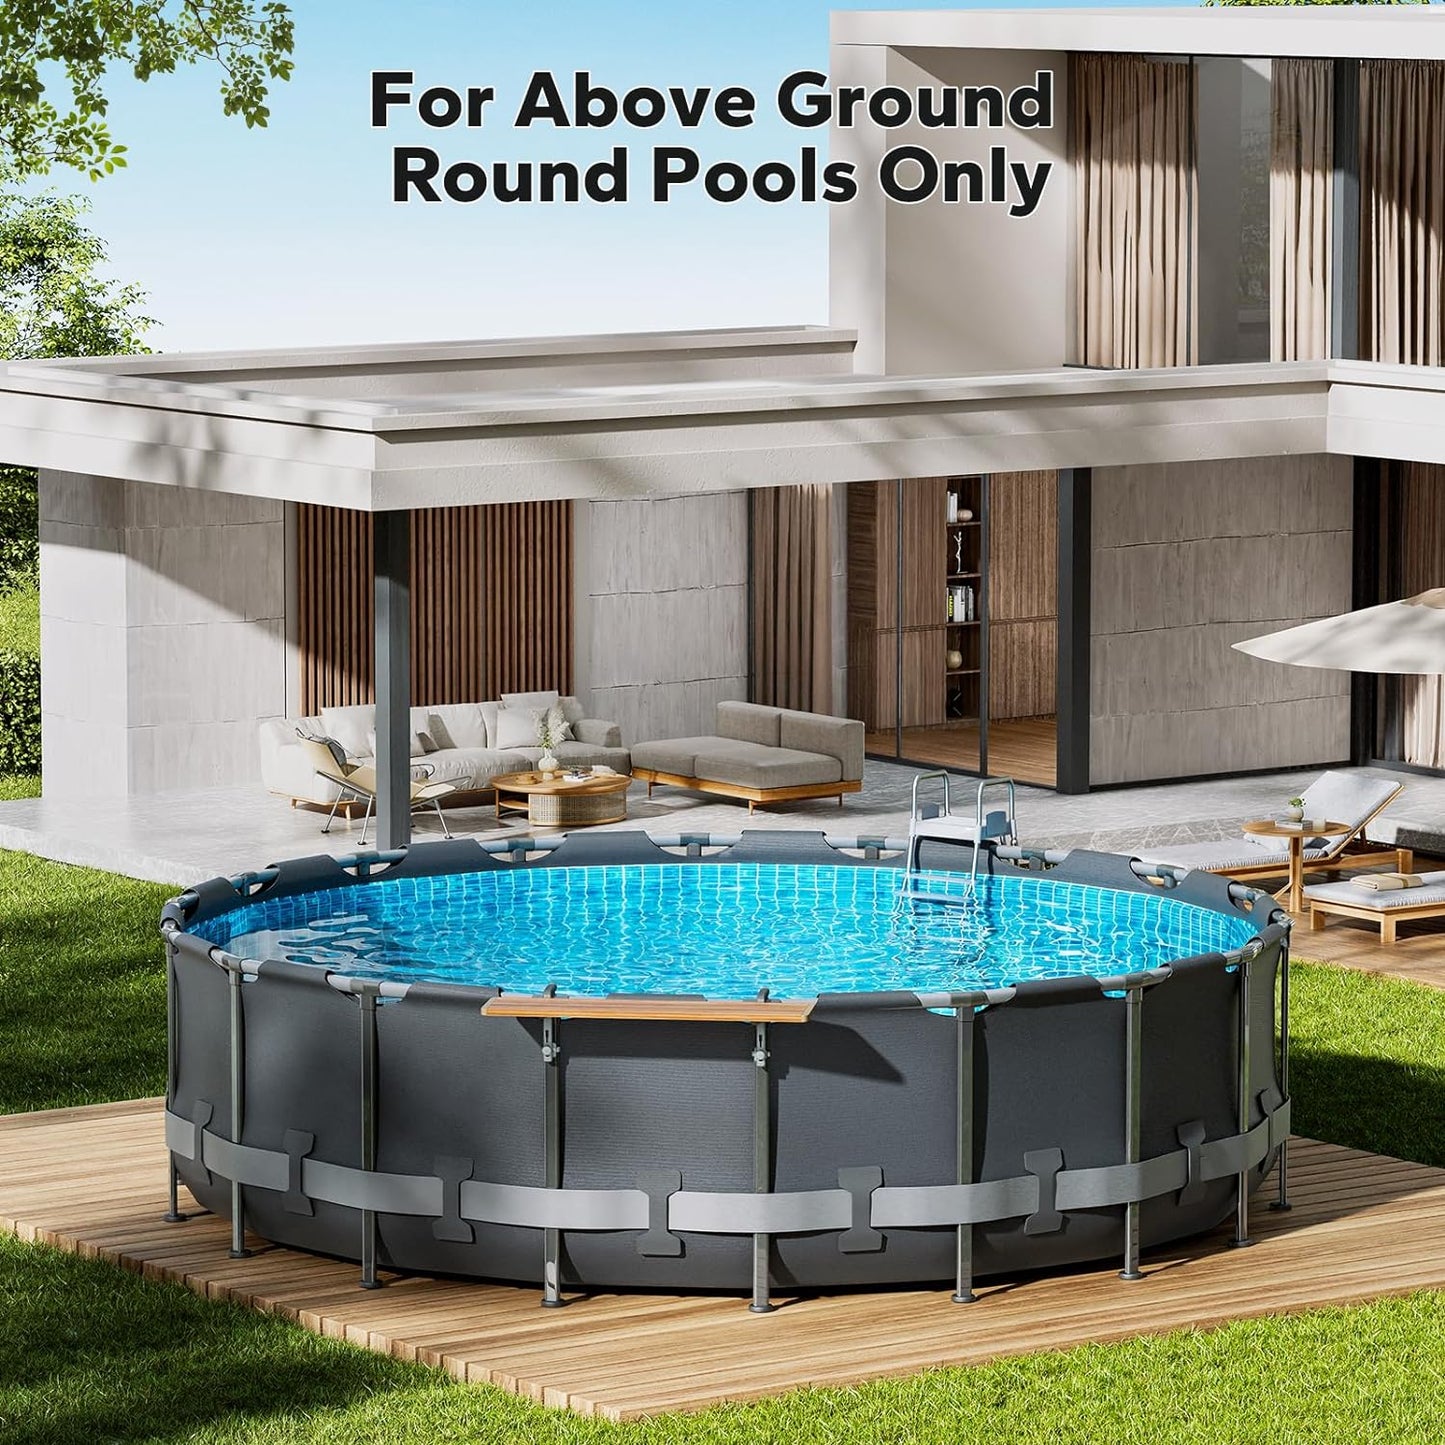 Poolside Bar for Aboveground Pool